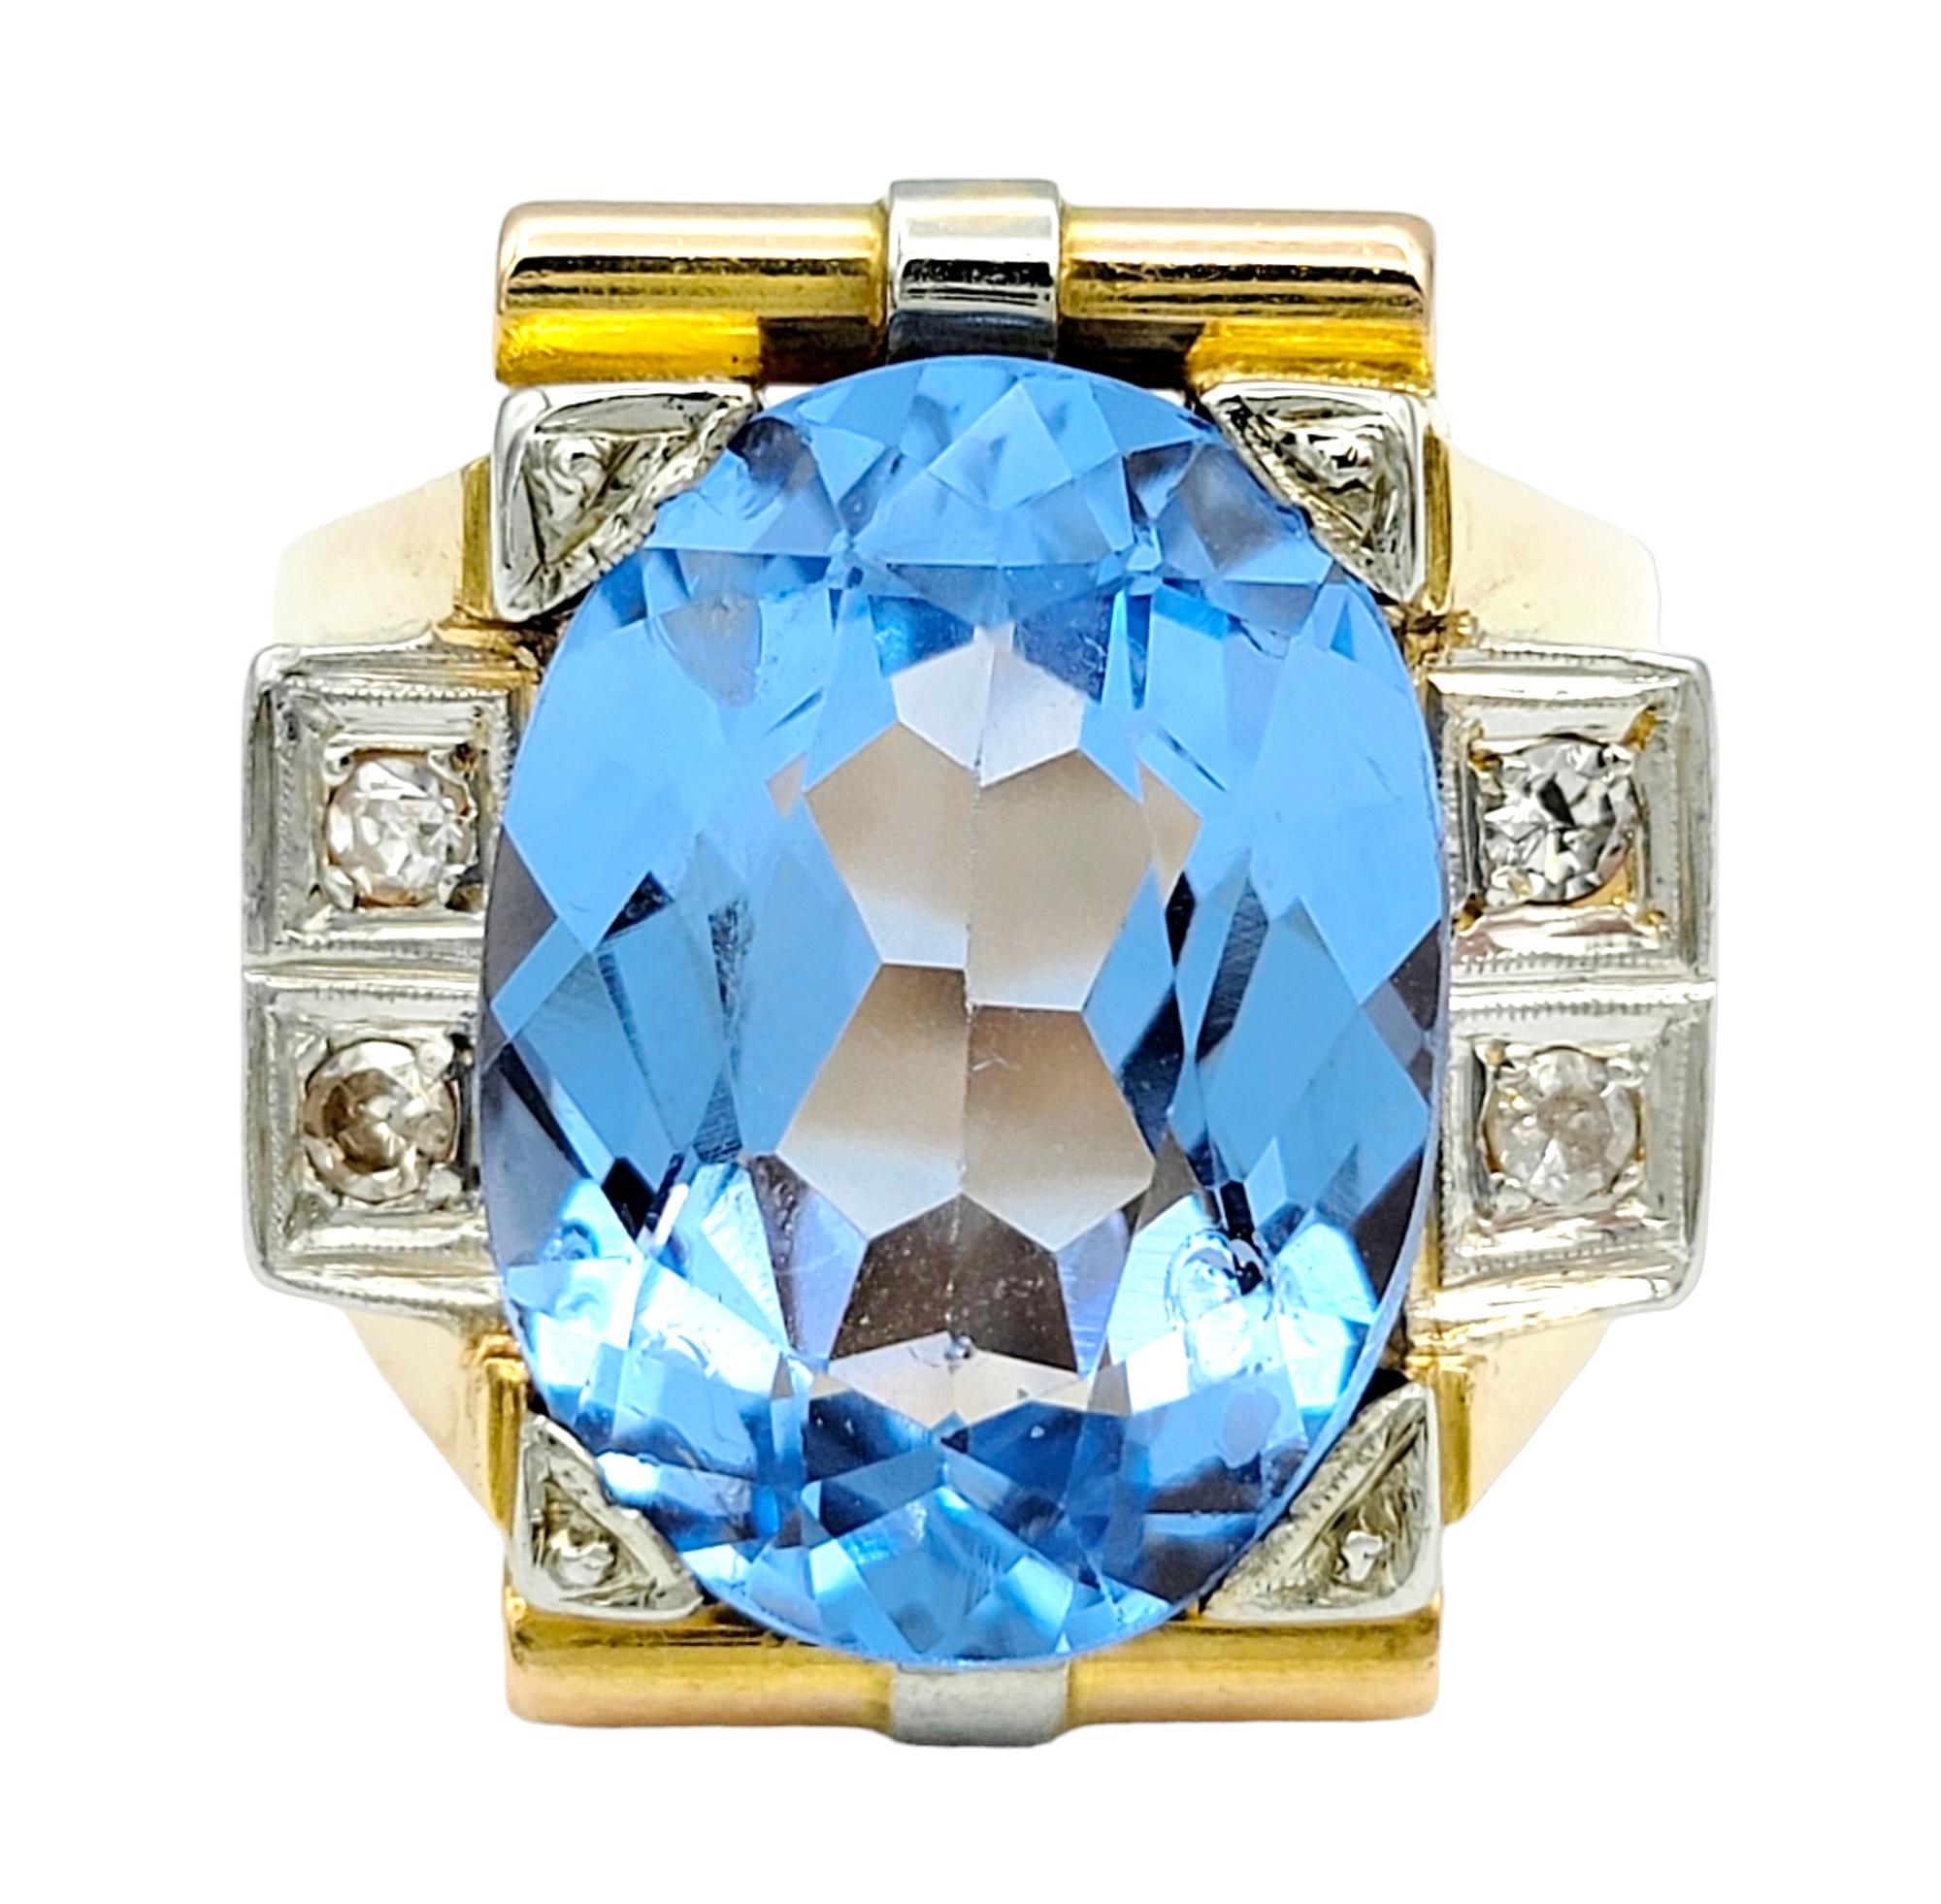 Ring Size: 10

This striking ring boasts a captivating 13.2 carat synthetic oval-cut spinel as its centerpiece, exuding a brilliant blue hue. Framed by four round single cut diamonds and set in an elongated rectangular arrangement, the piece is a